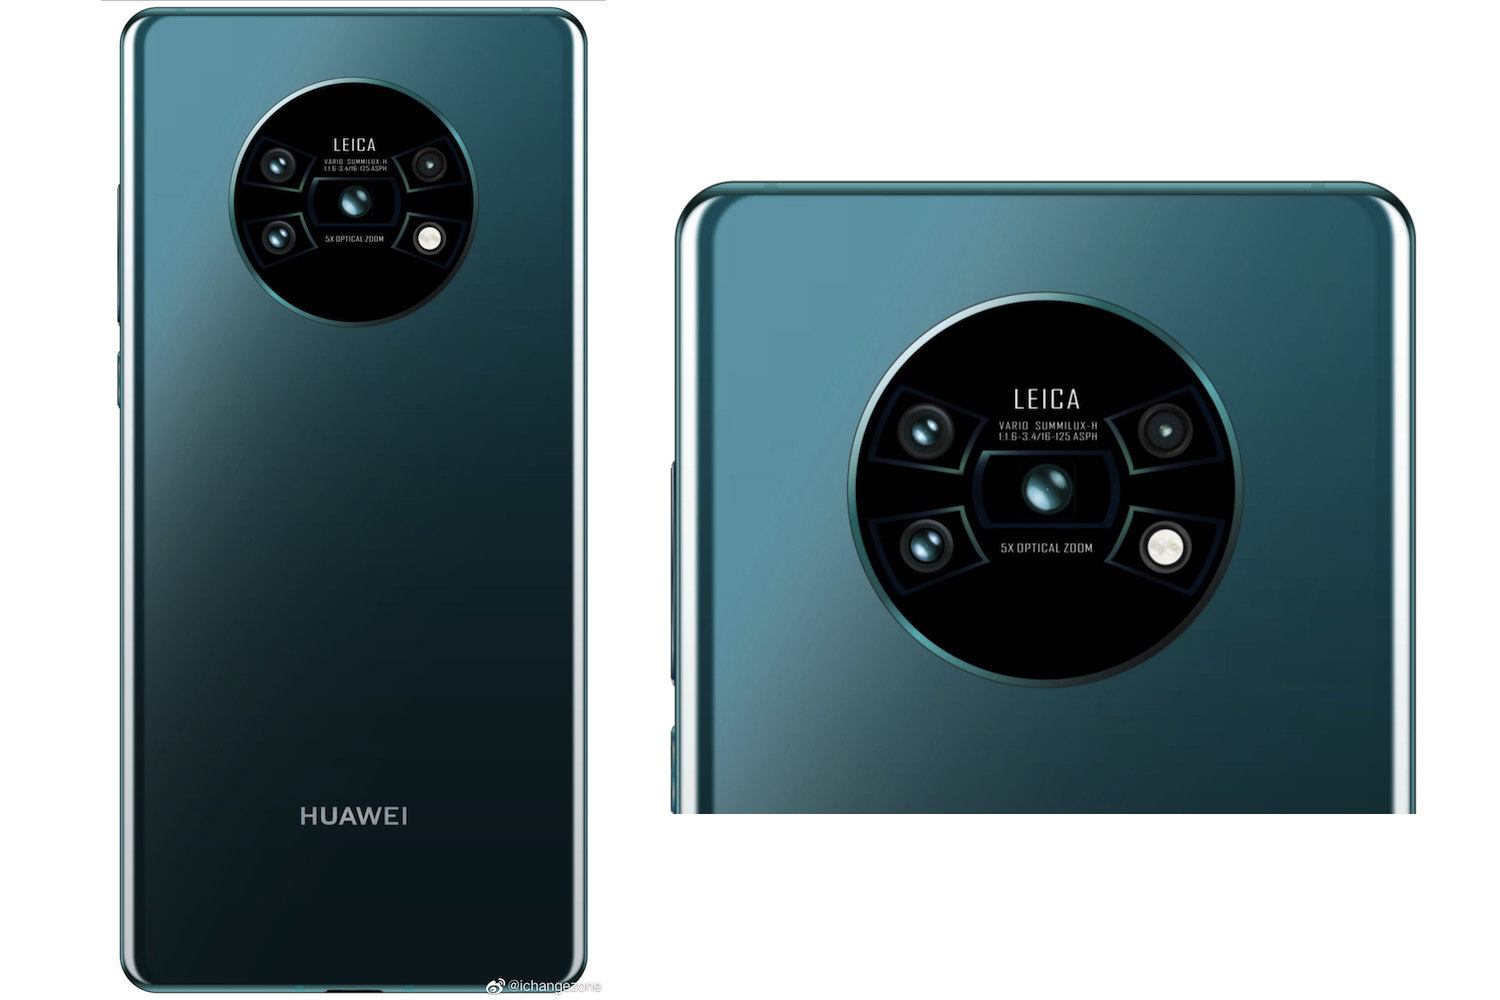 Klein Verplicht zeil For the Mate 30, Huawei May Follow 2019's Mad Camera Design Trend | Digital  Trends